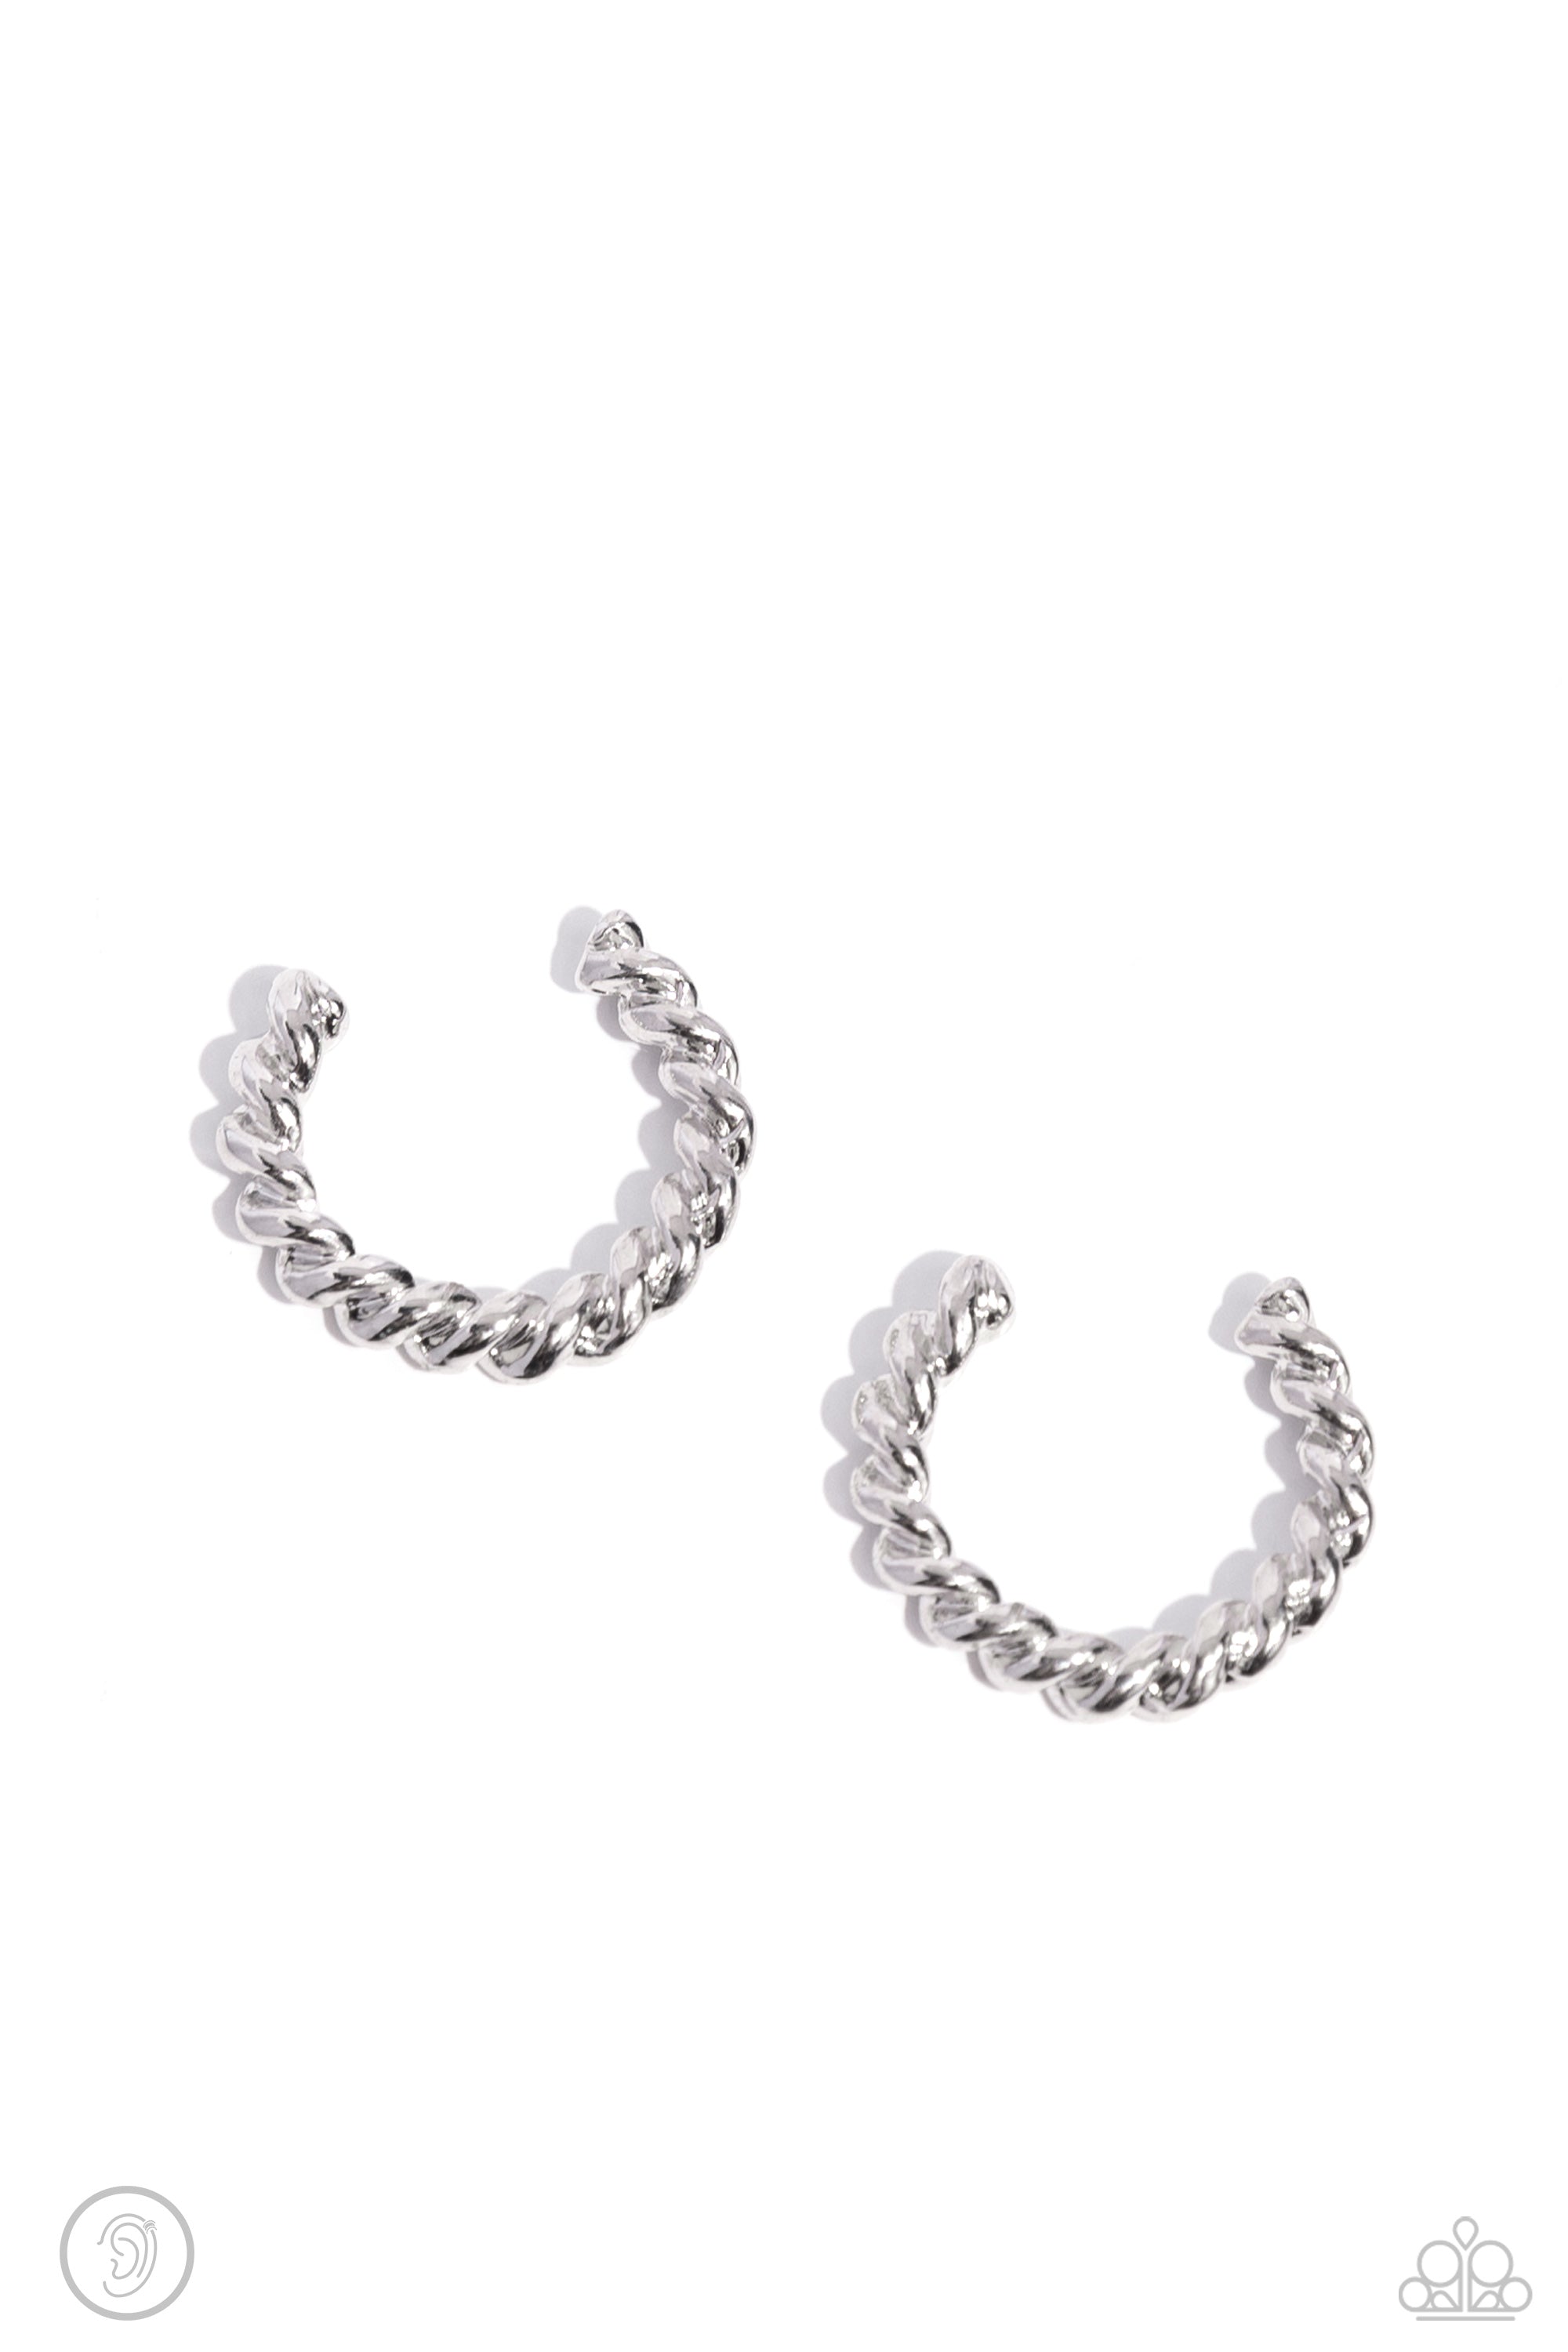 Twisted Travel Silver Cuff Earrings - Paparazzi Accessories- lightbox - CarasShop.com - $5 Jewelry by Cara Jewels